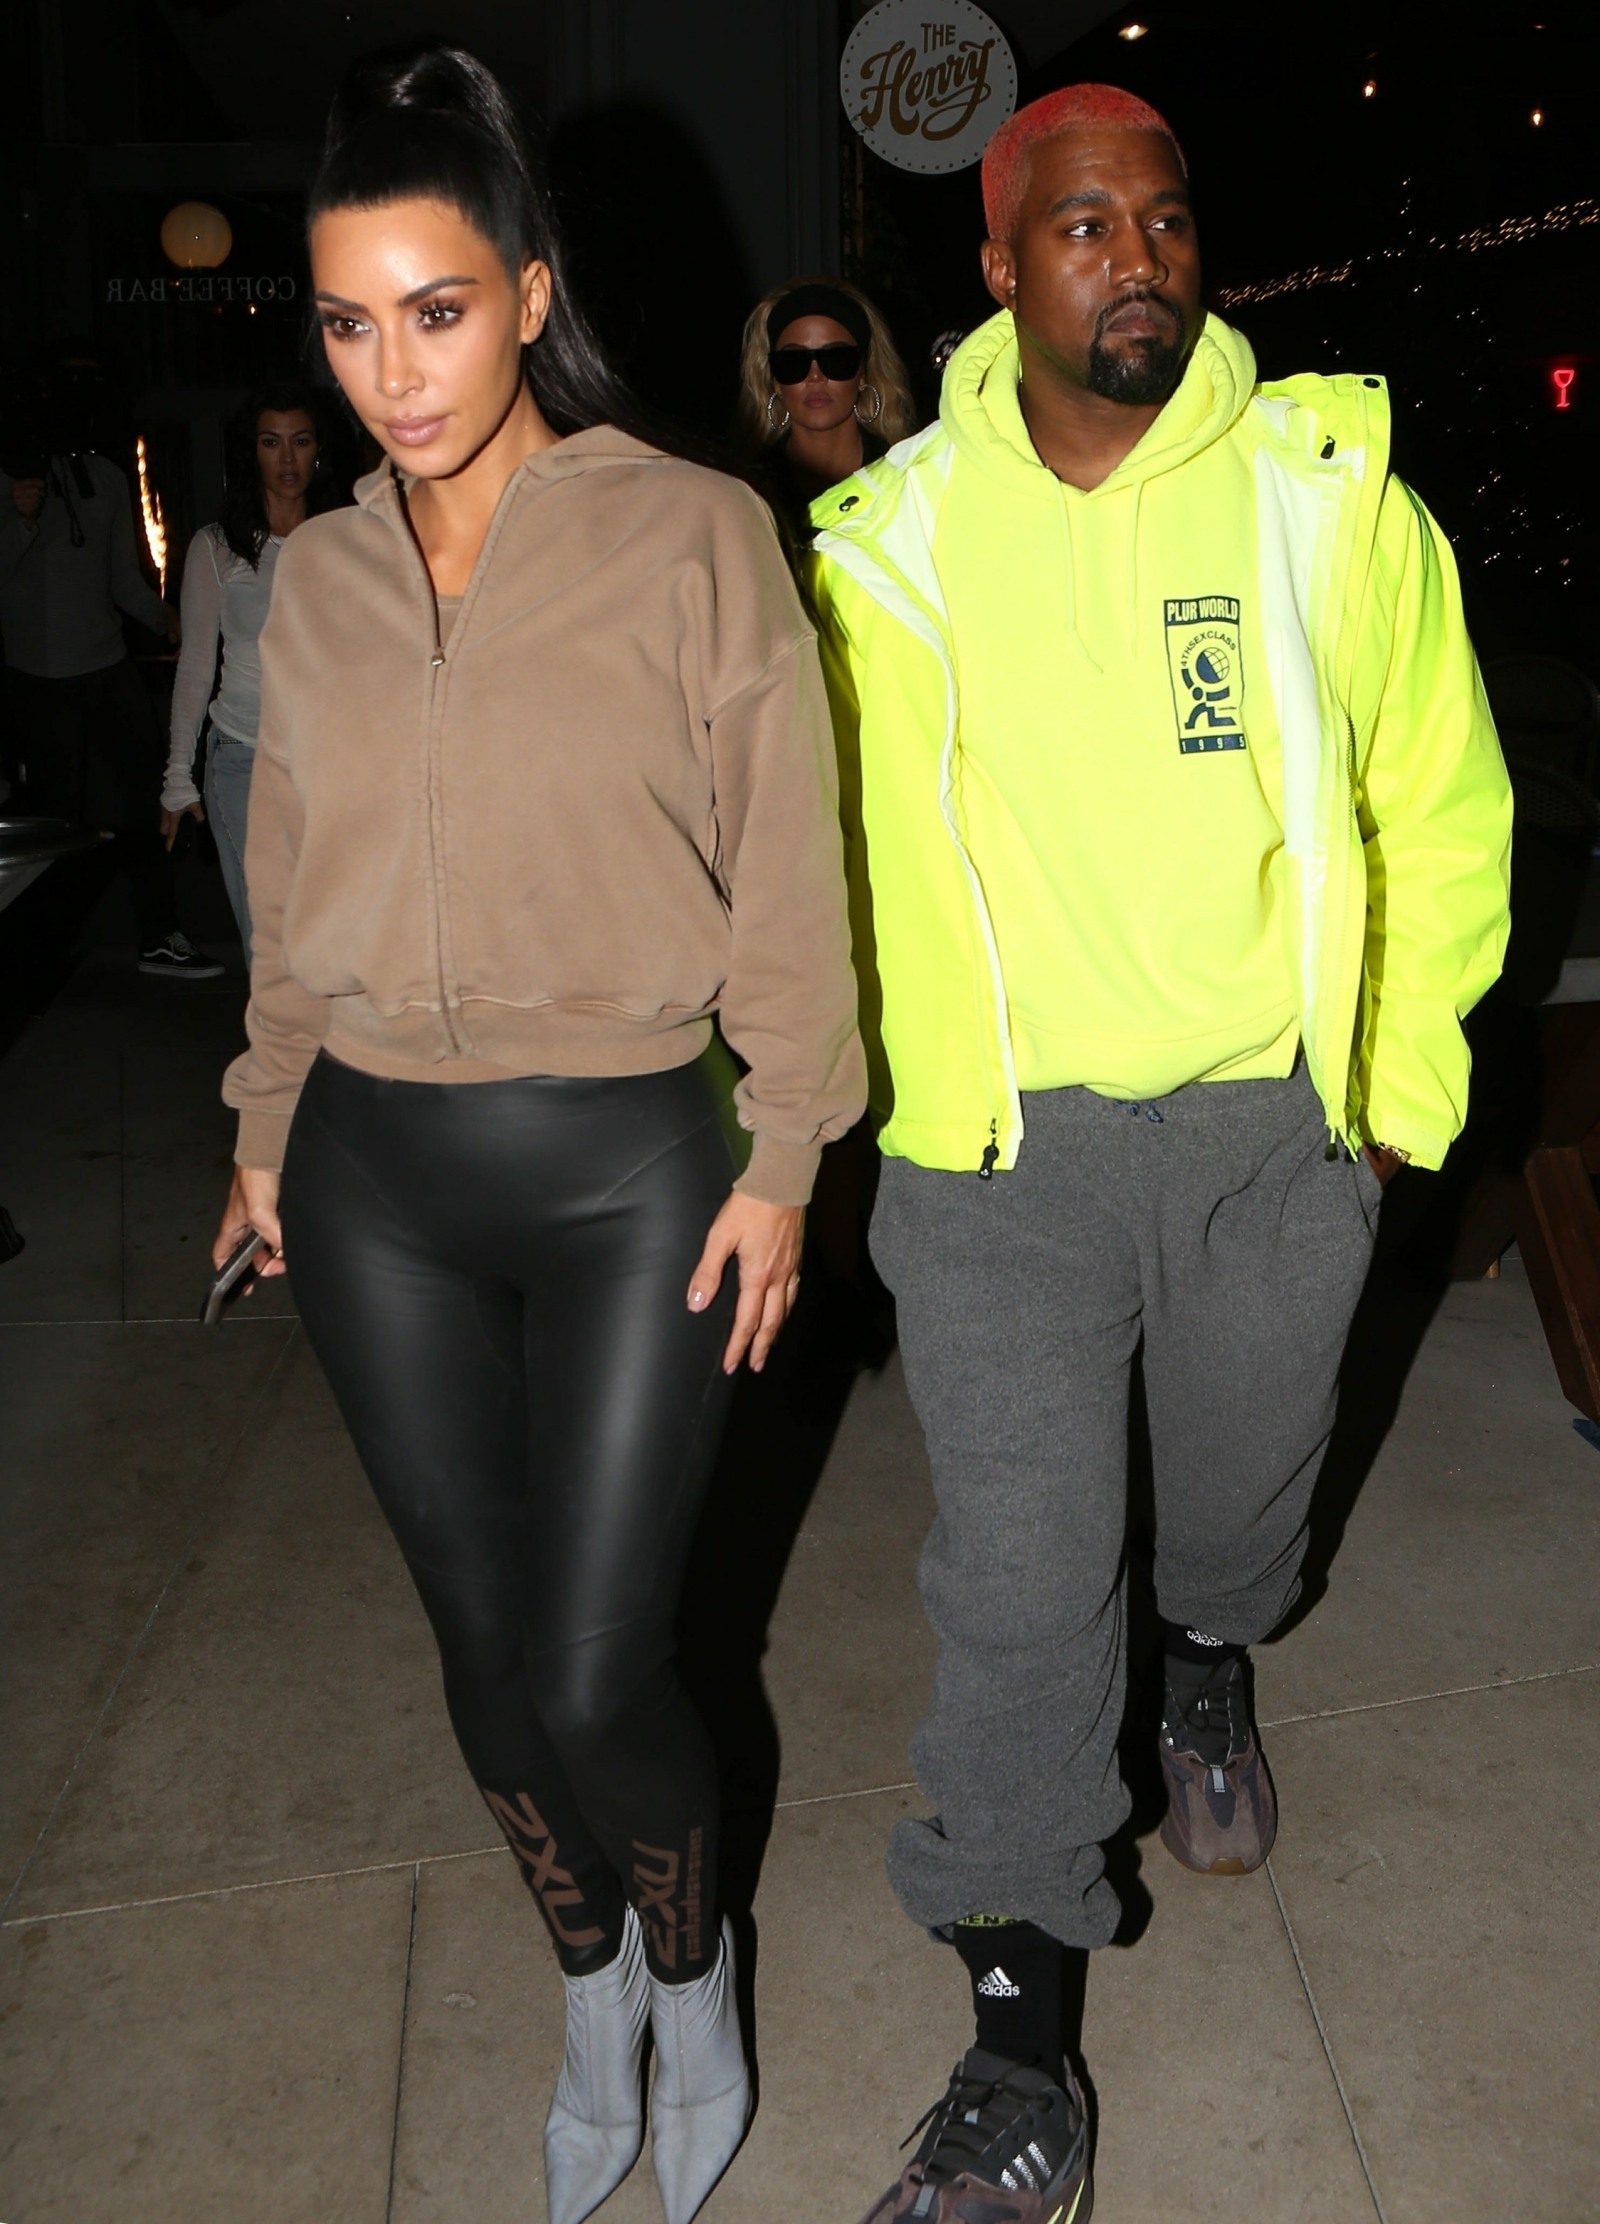 Kim Kardashian and Kanye West have dinner at with Khloe during LA wildfires